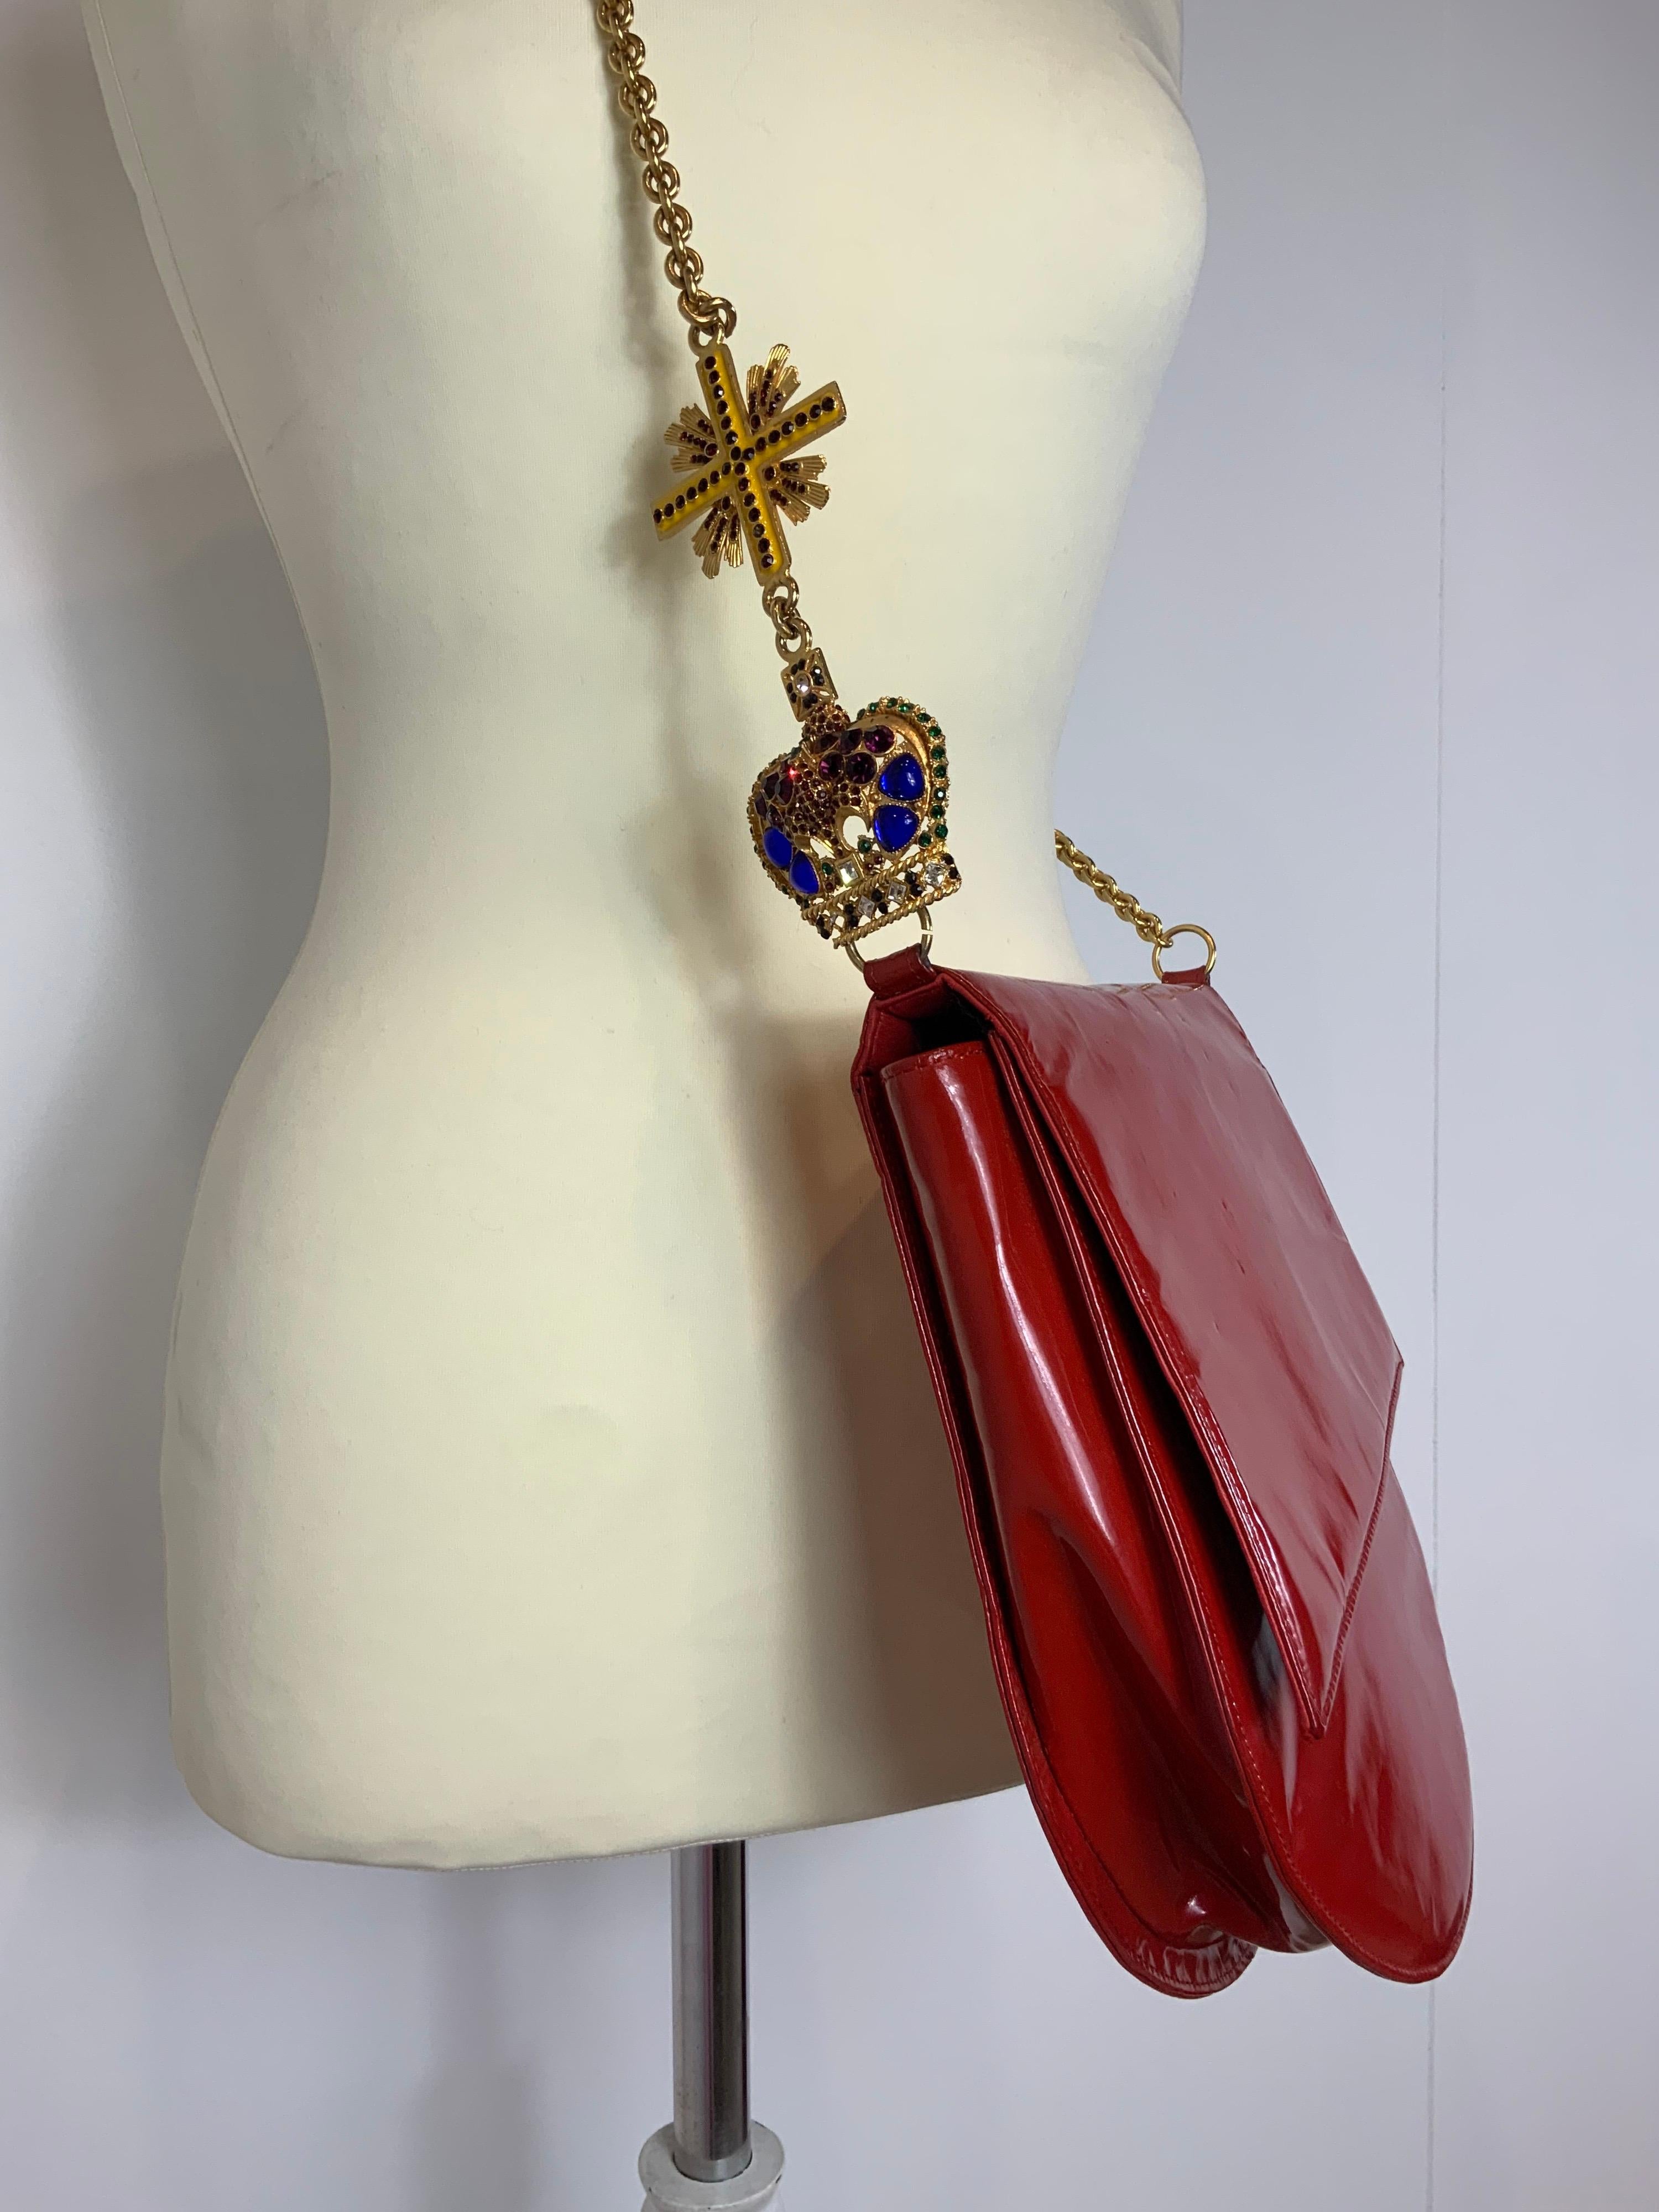 Women's or Men's Gianni Versace red leather shoulder bag